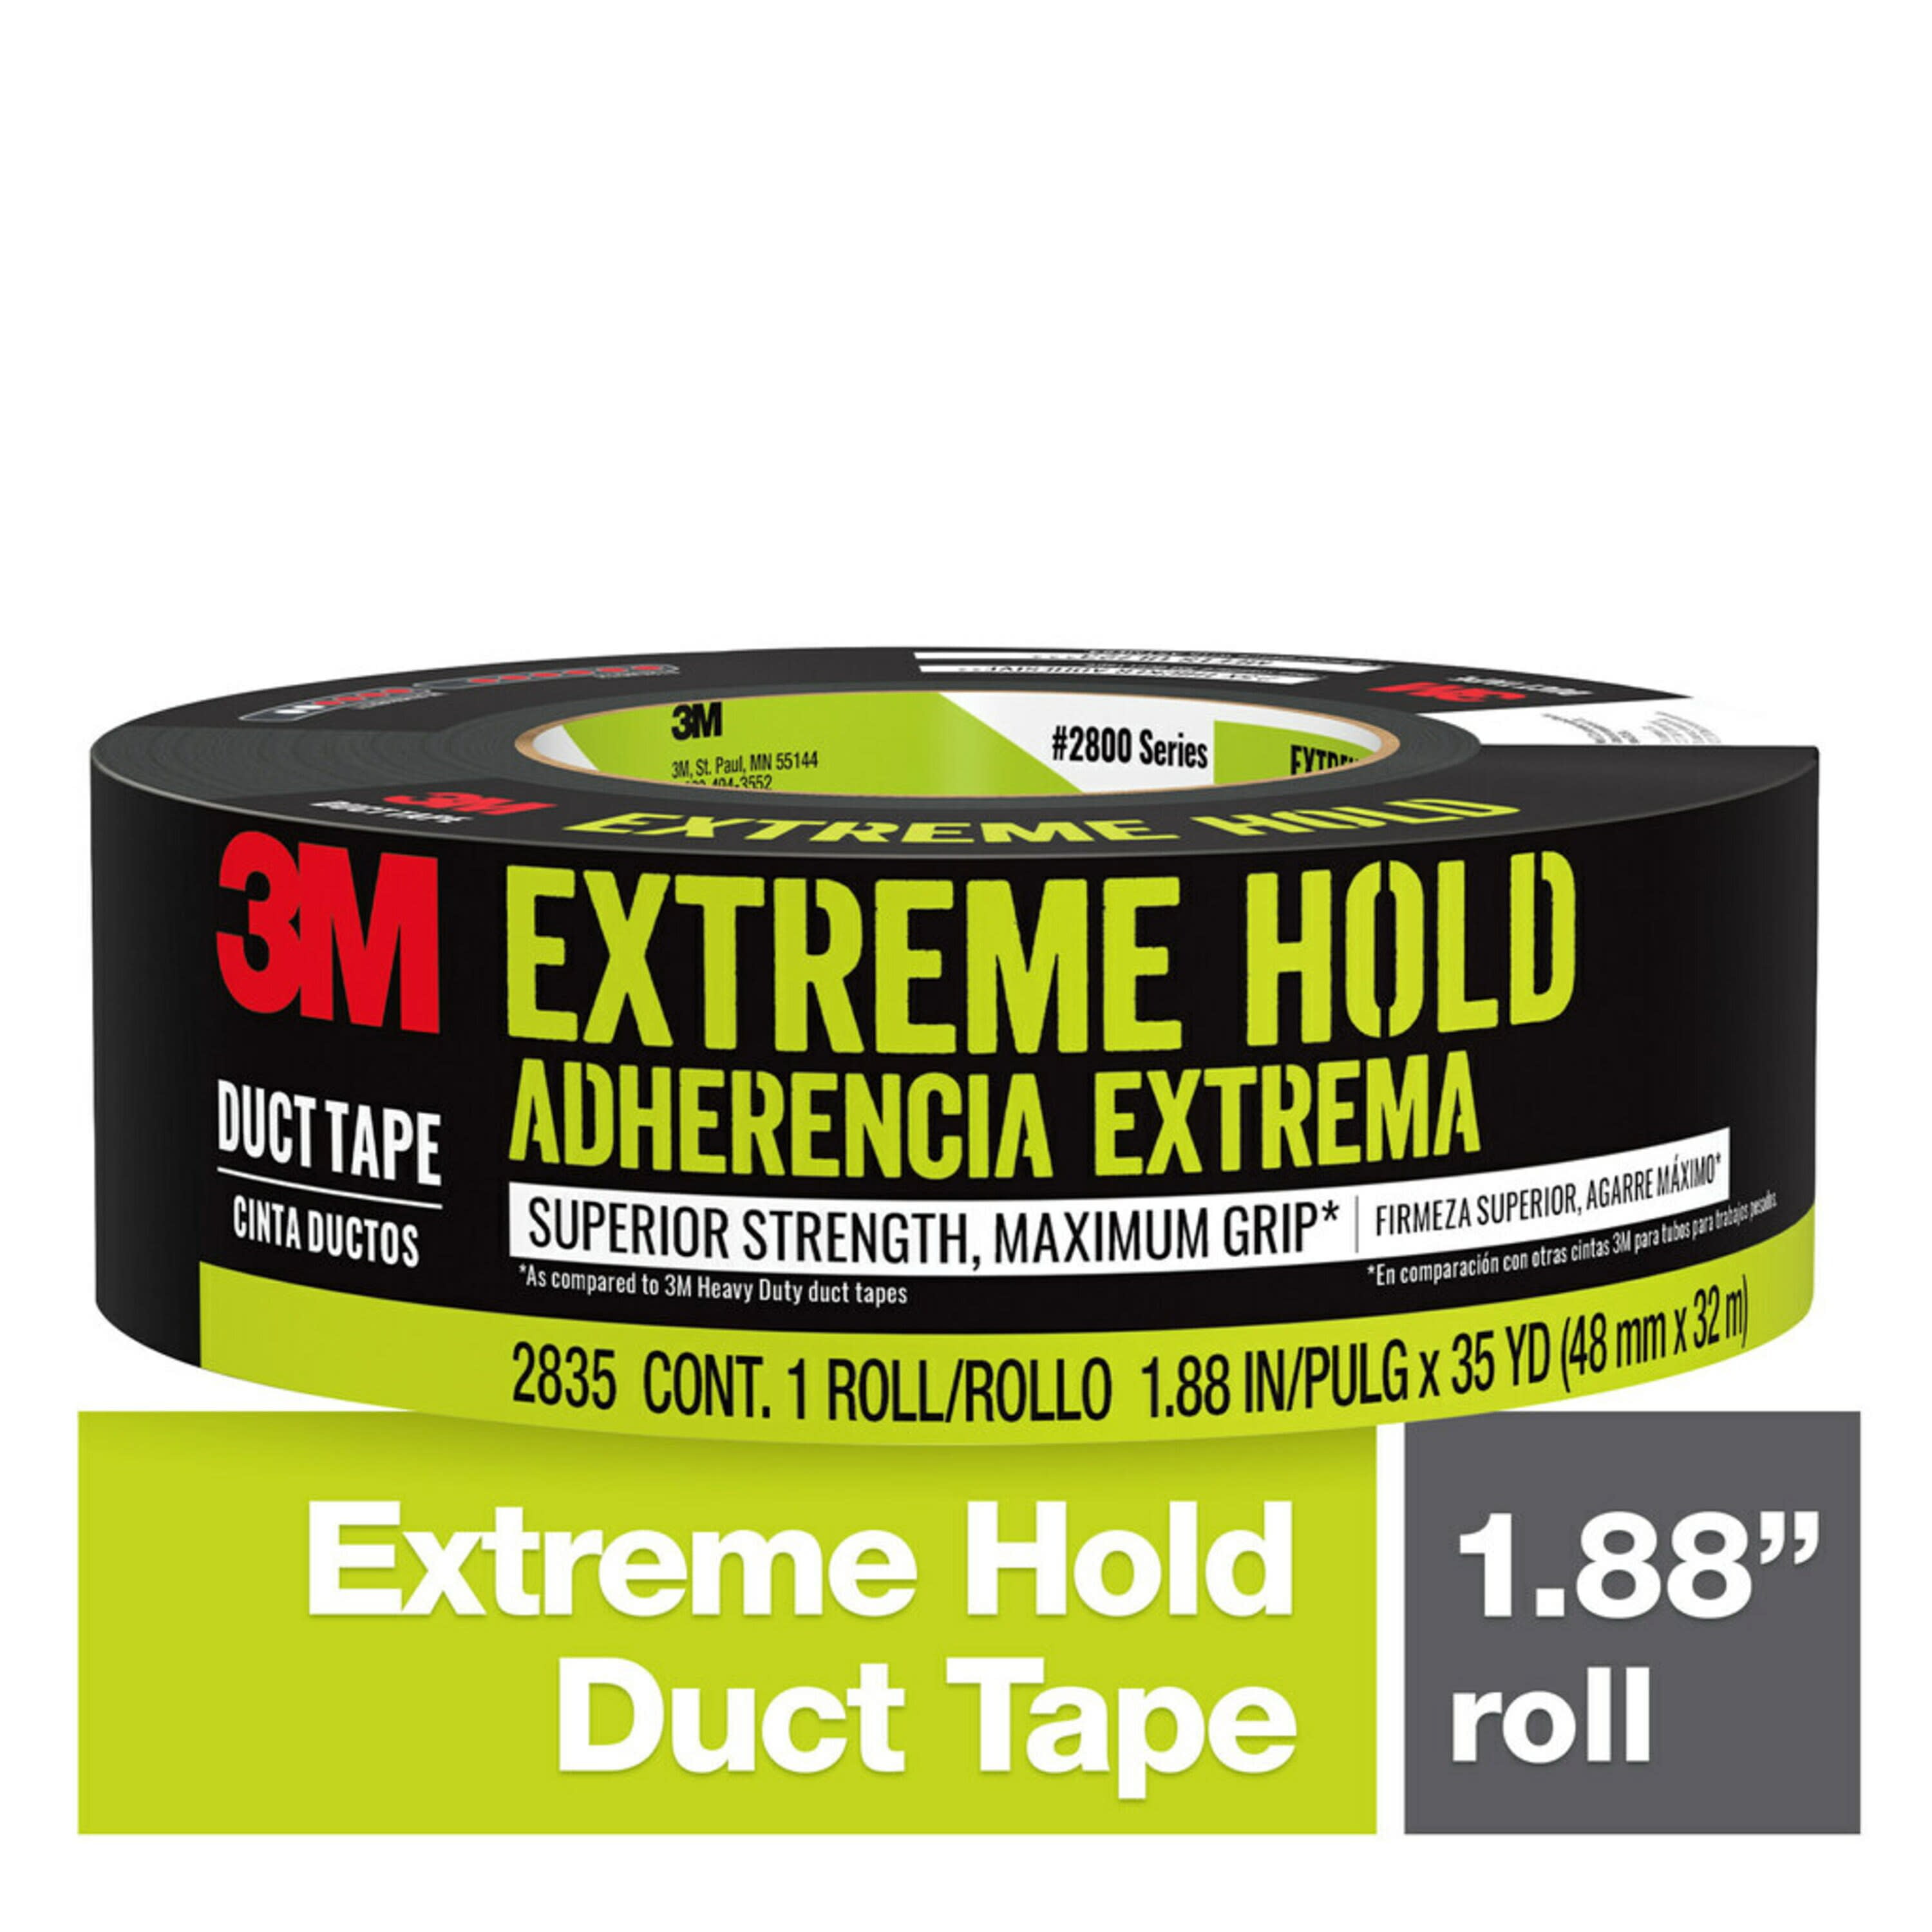 3M Extreme Hold Duct Tape, 1.88 in x 35 yd, Black, 1 Roll/Pack